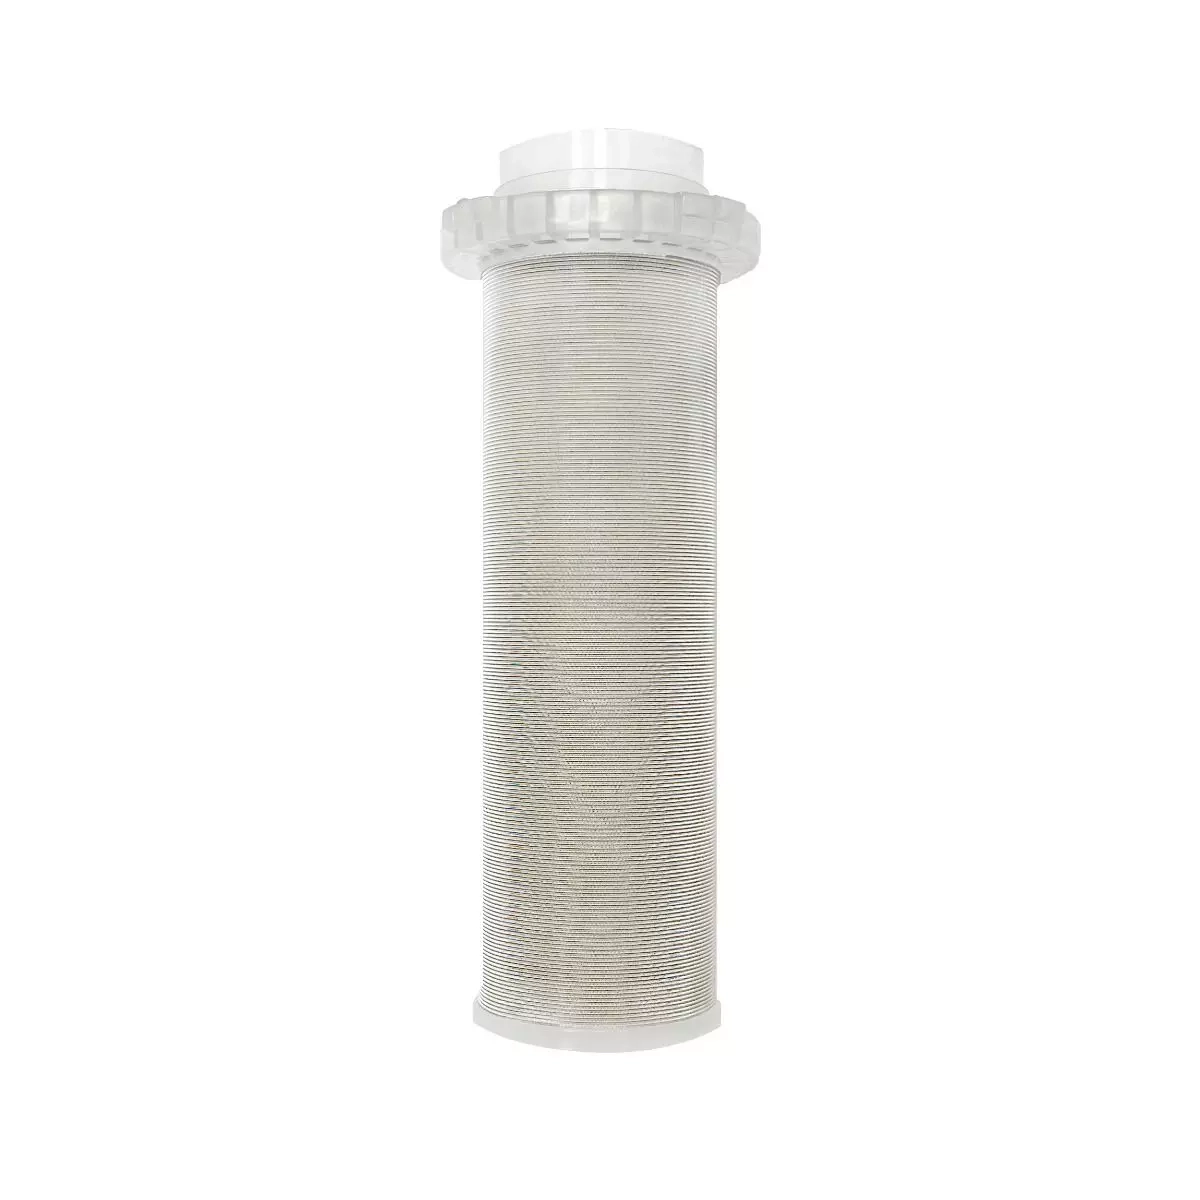 Replacement Cartridge For Aquaboon Spin Down Sediment Water Pre Filter, 150 Micron